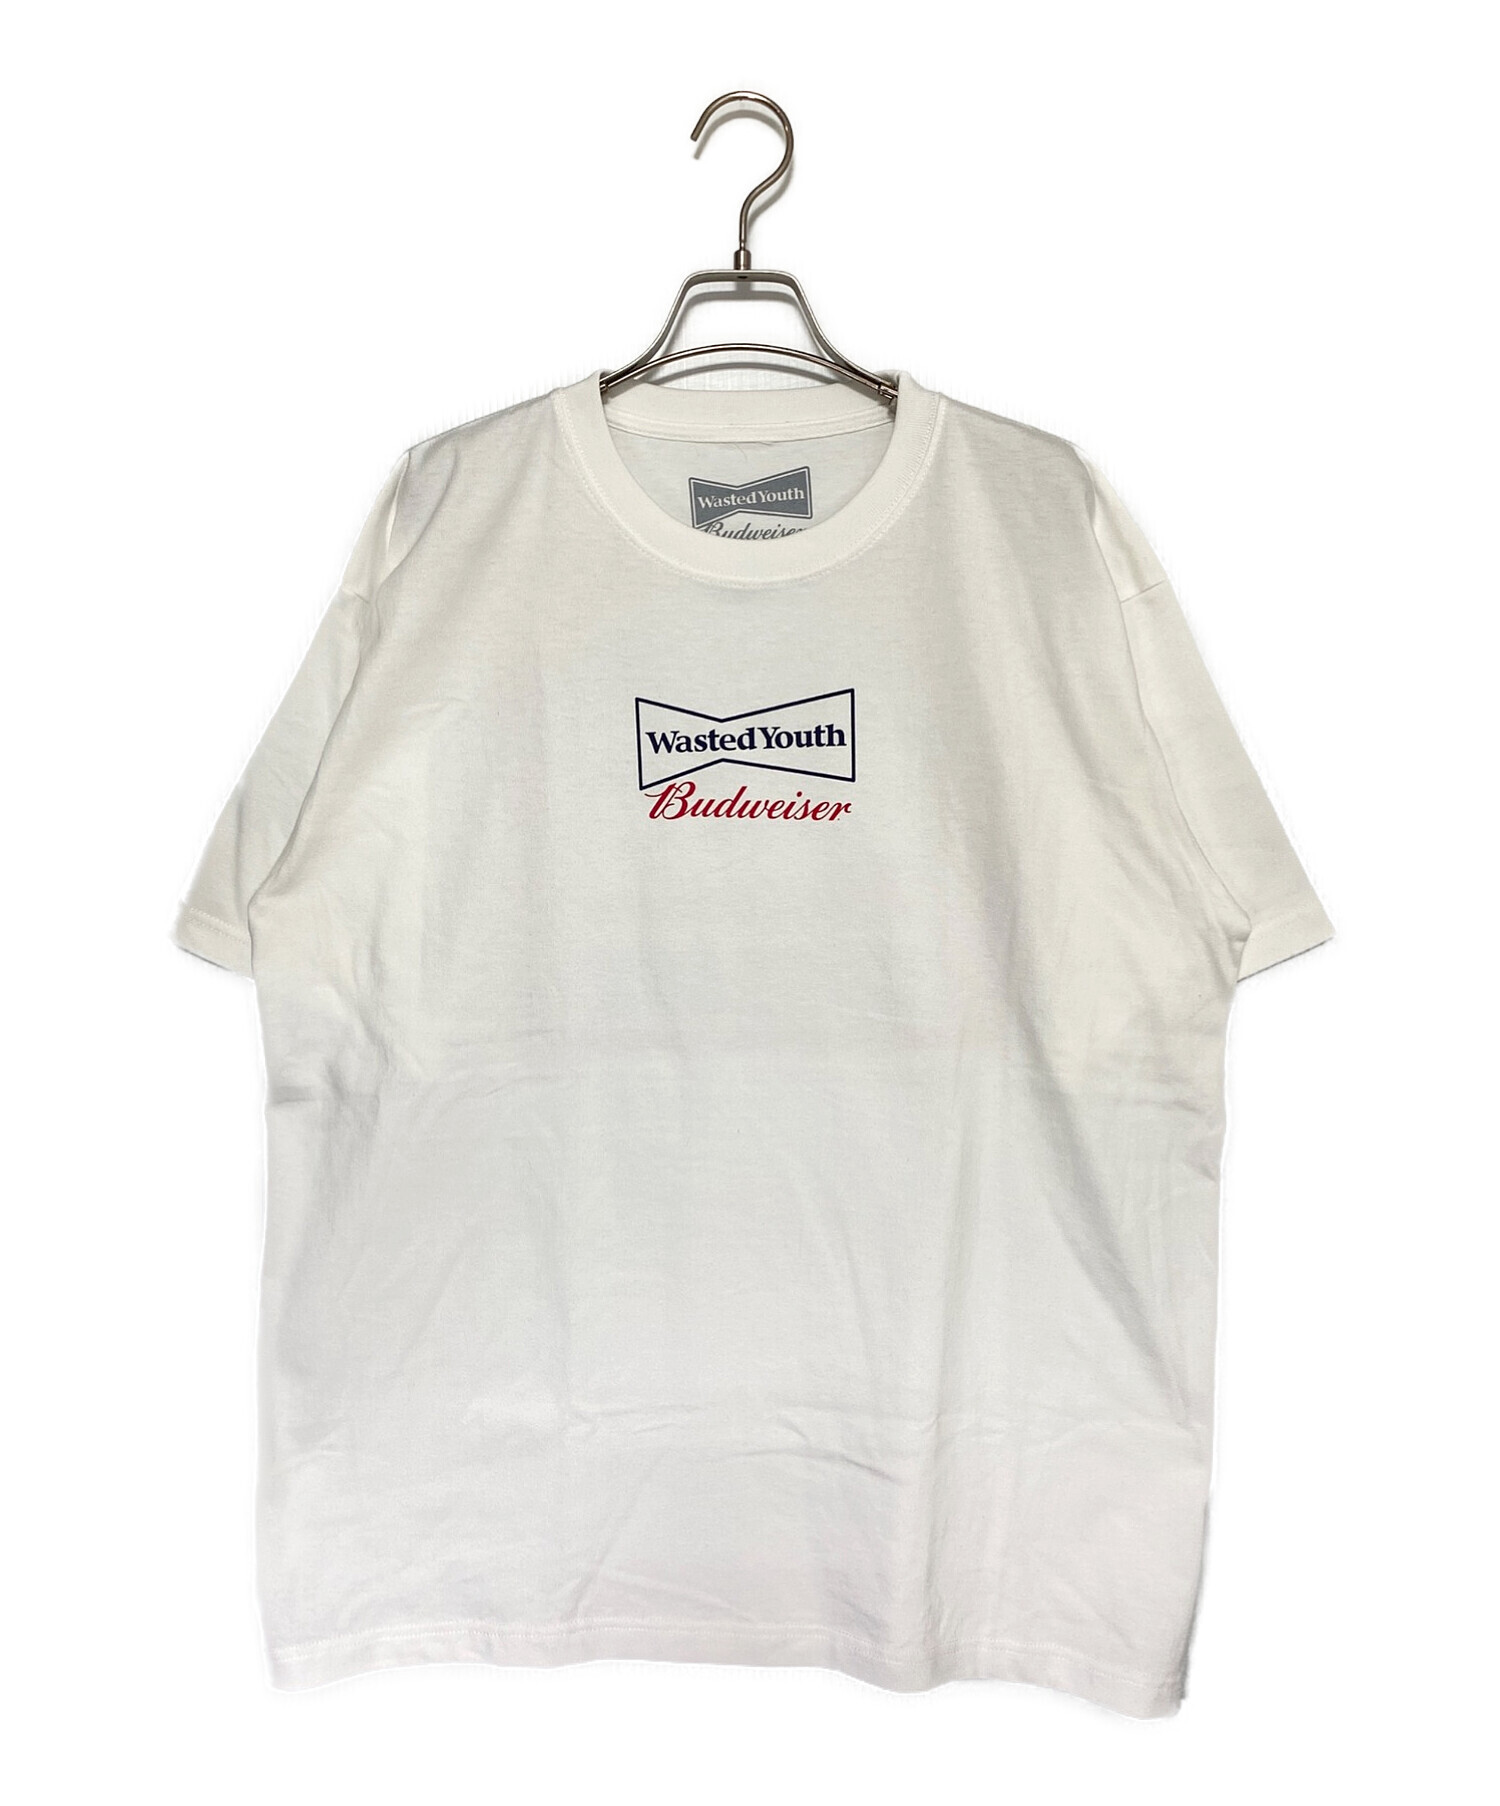 Wasted Youth × Budweiser Tee XL - Tシャツ/カットソー(半袖/袖なし)